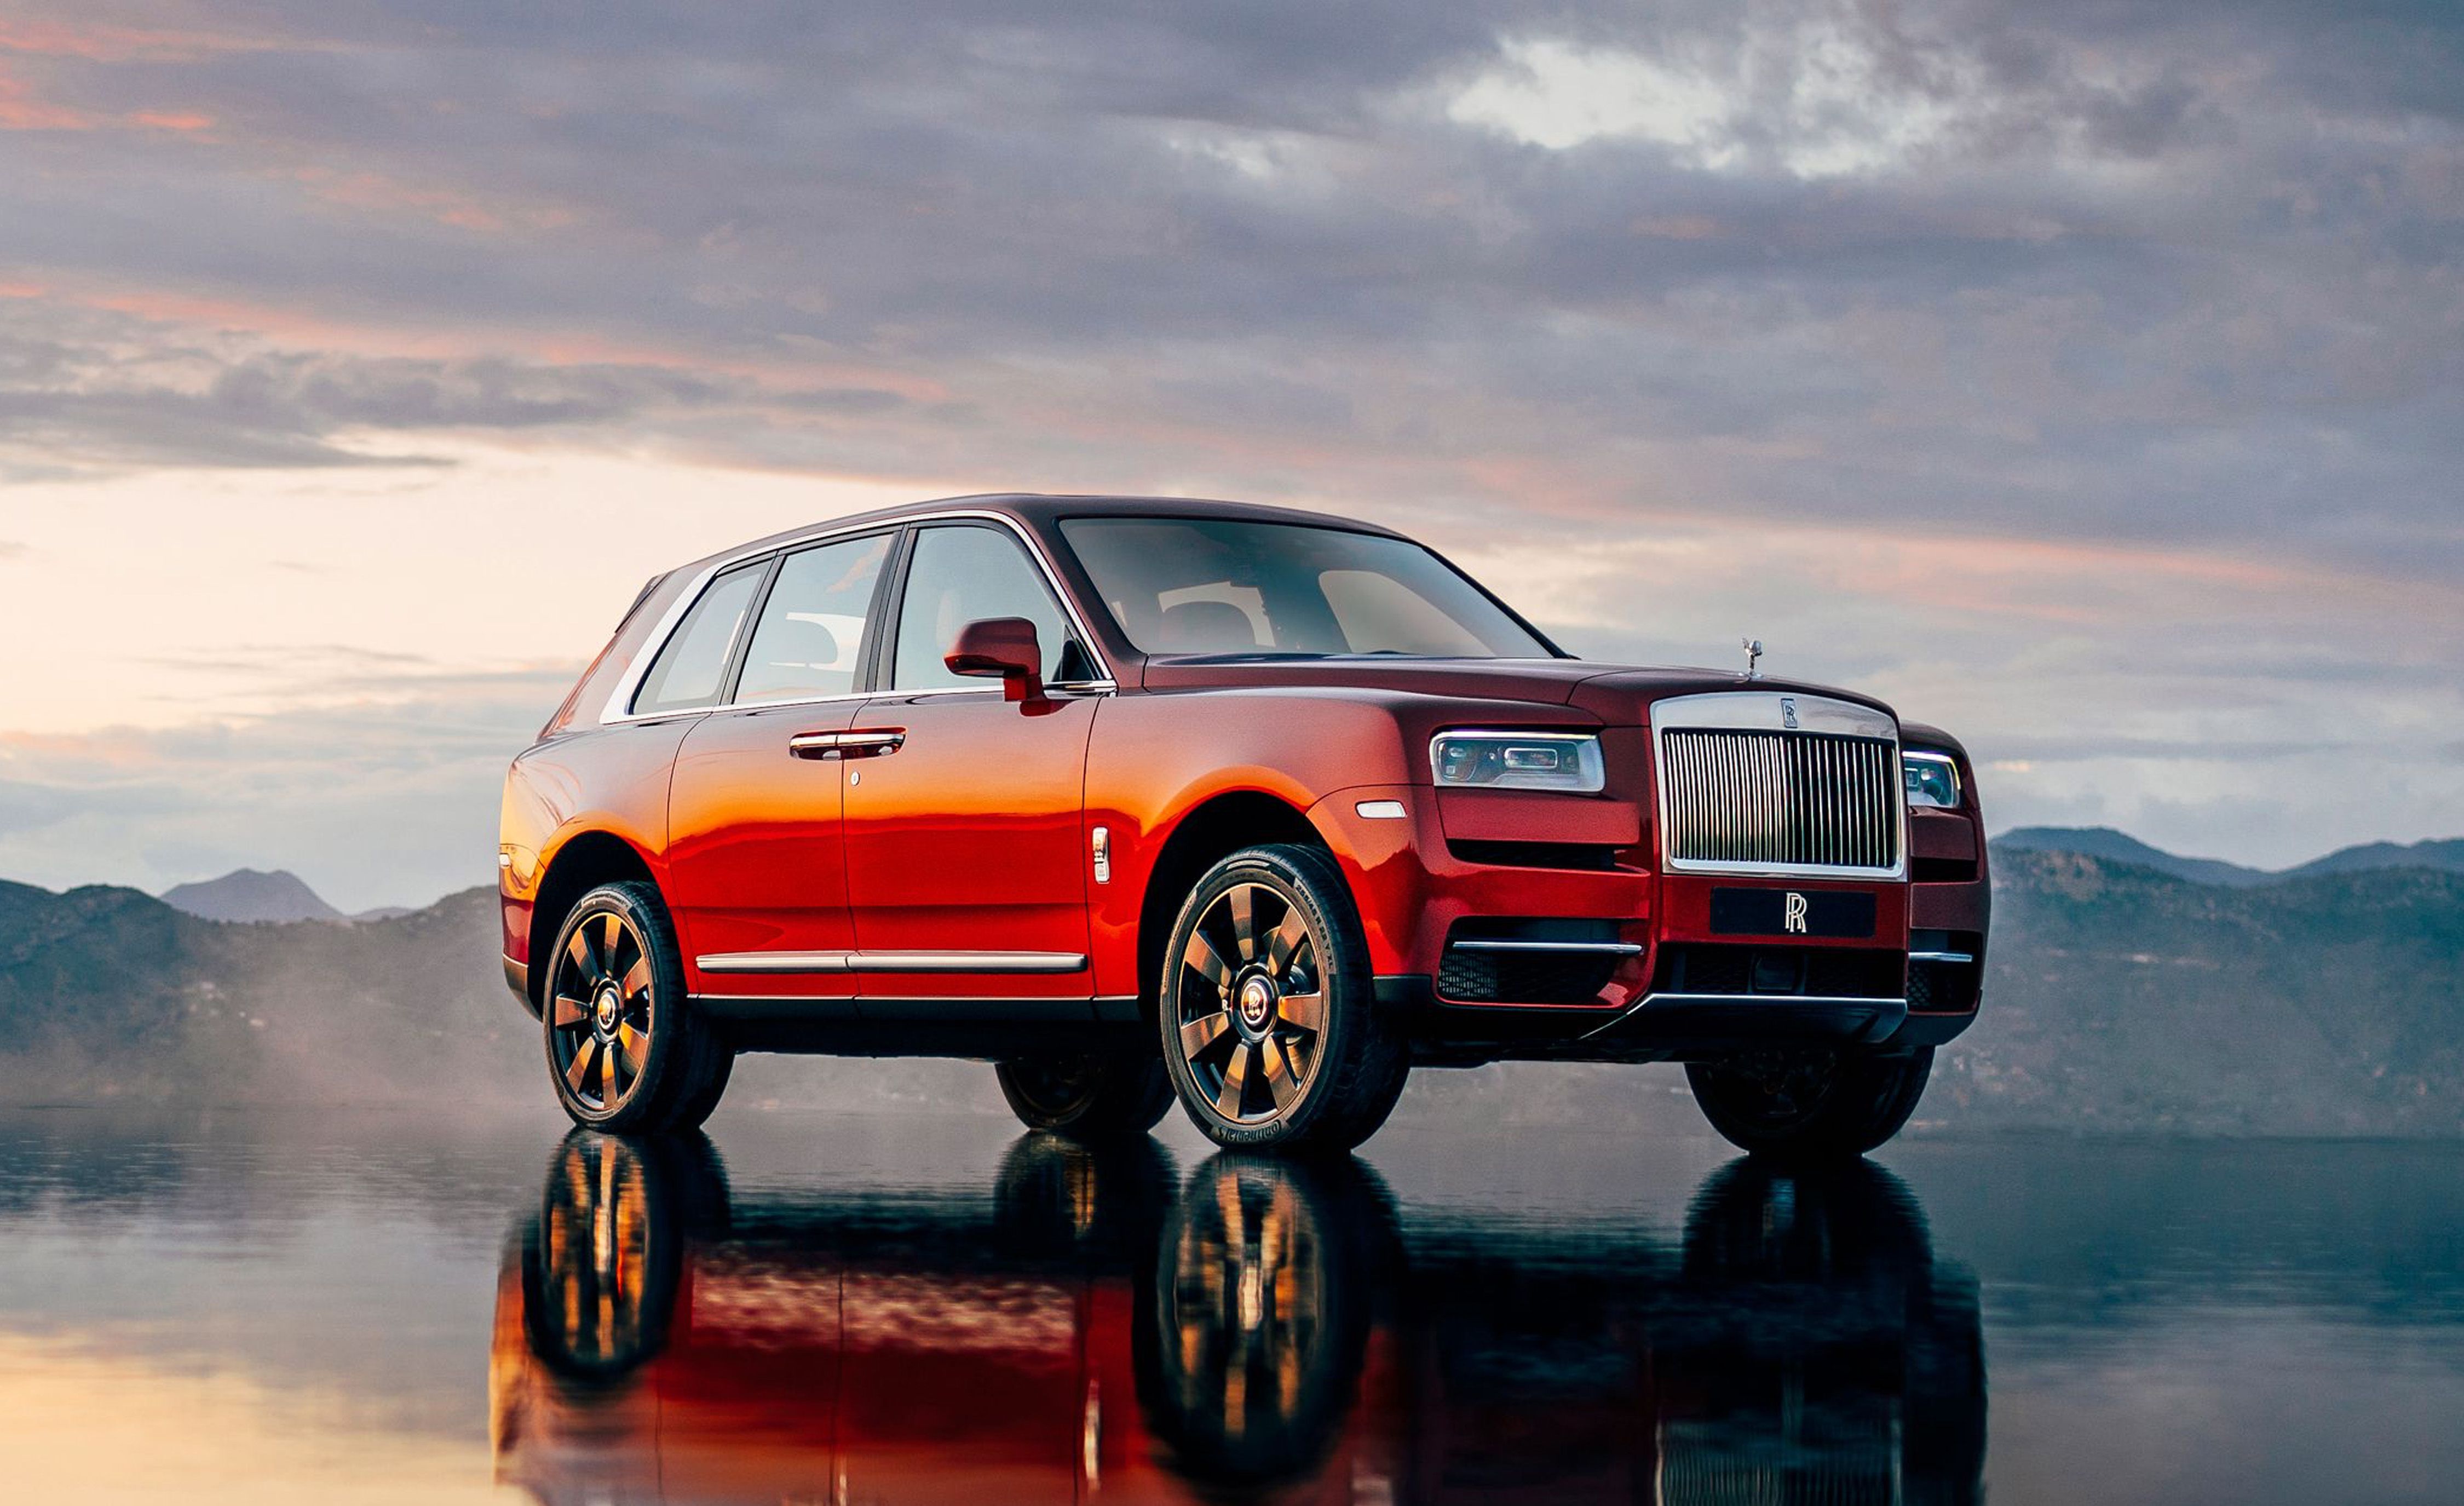 2019 RollsRoyce Cullinan Reviews RollsRoyce Cullinan Price, Photos, and Specs Car and Driver